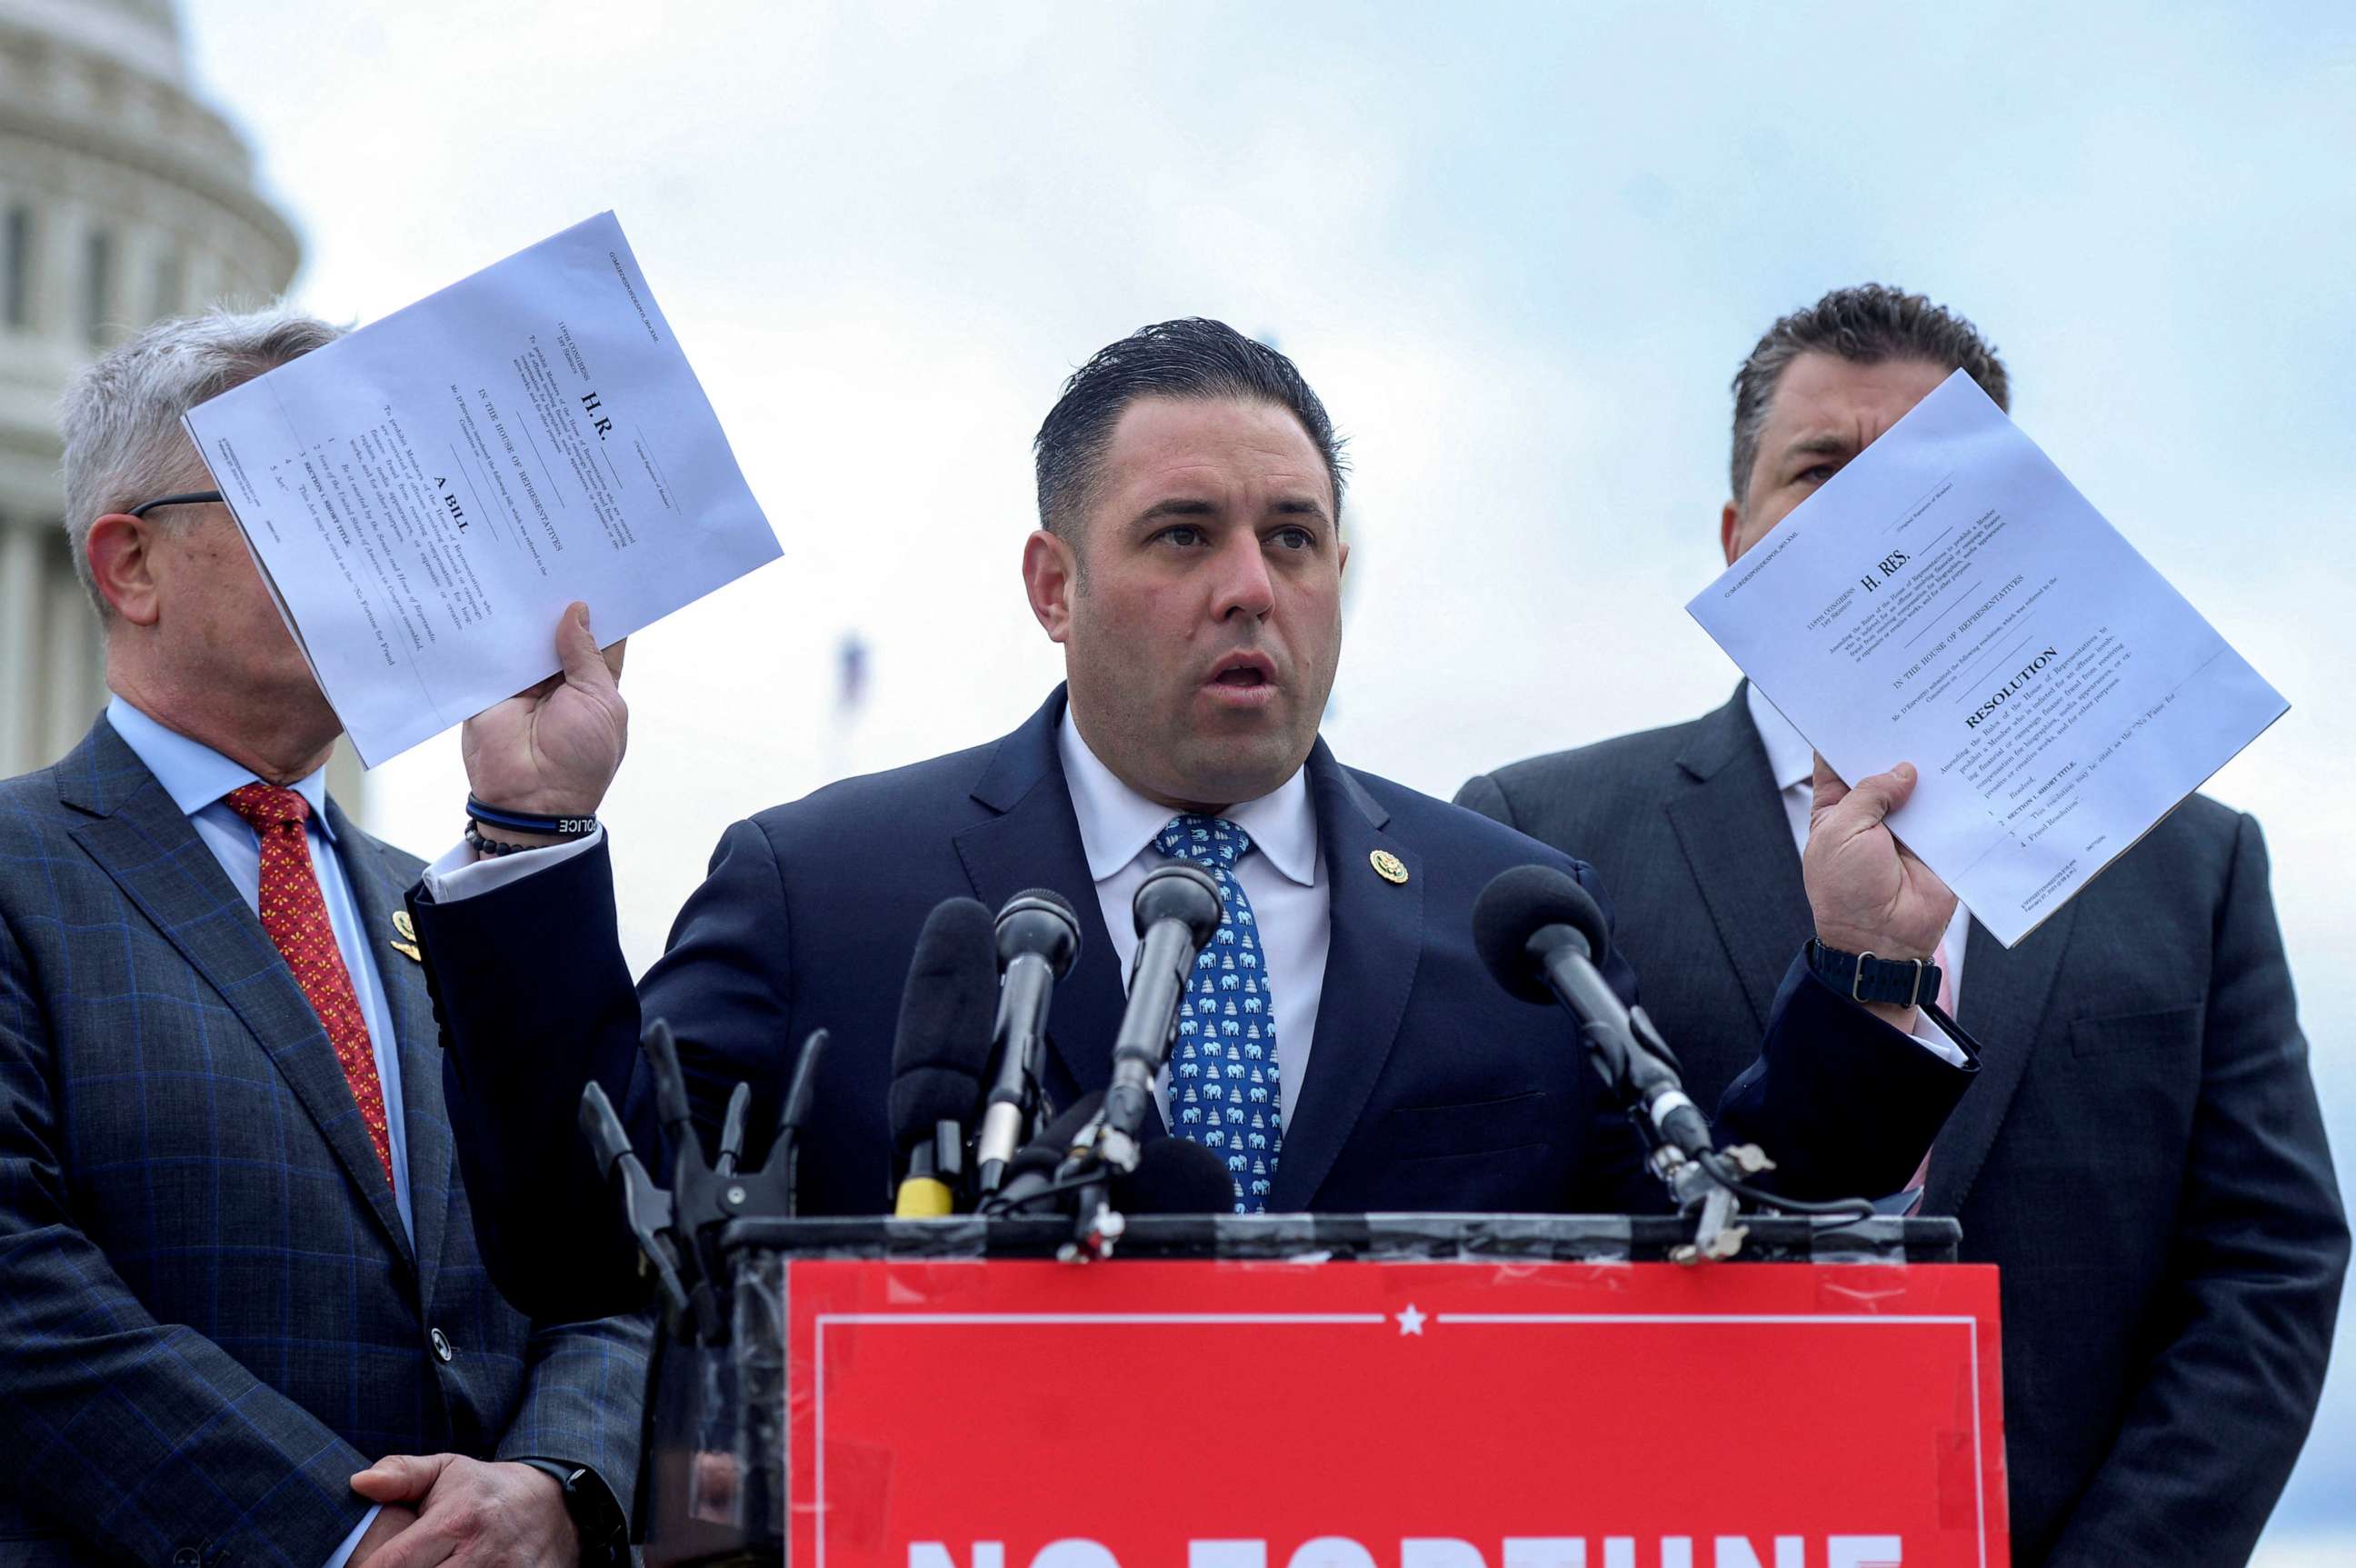 PHOTO: Rep. Anthony D'Esposito holds a copy of the "No Fortune for Fraud" Act, a law prohibiting House lawmakers convicted of certain offenses from profiting off their fabrications, during a press conference on Capitol Hill in Washington, March 7, 2023.